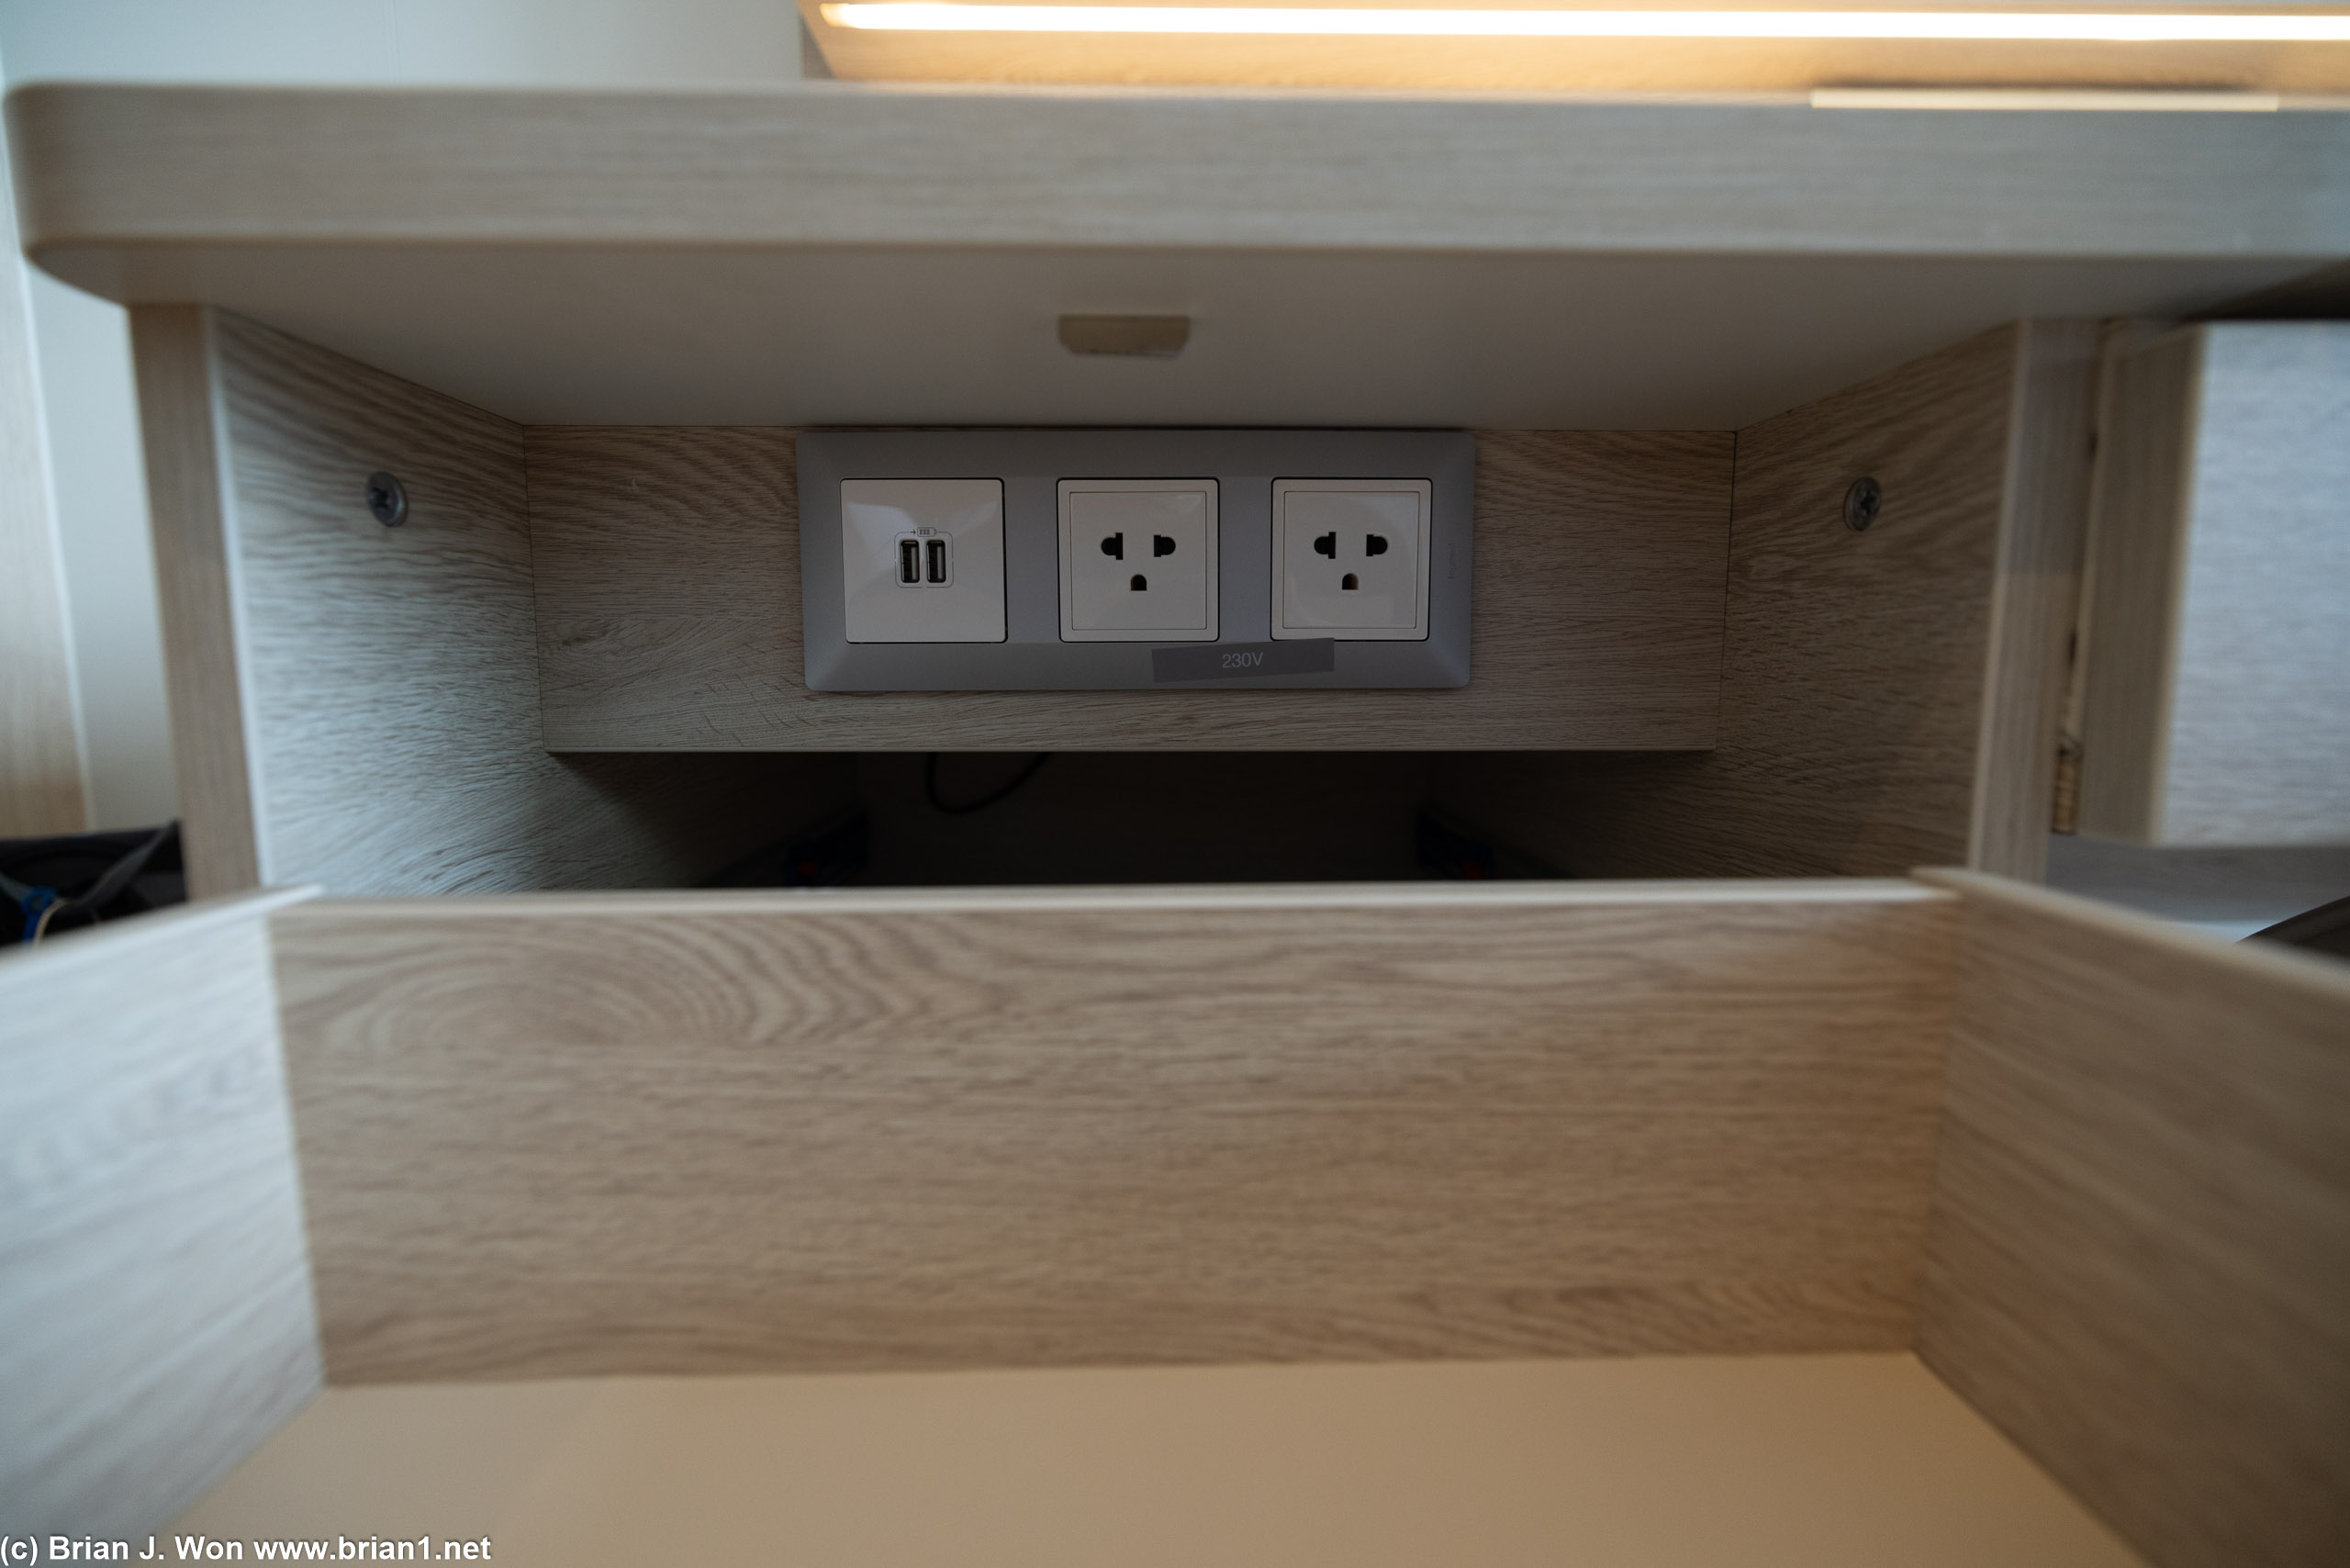 Tons of power outlets in convenient places.